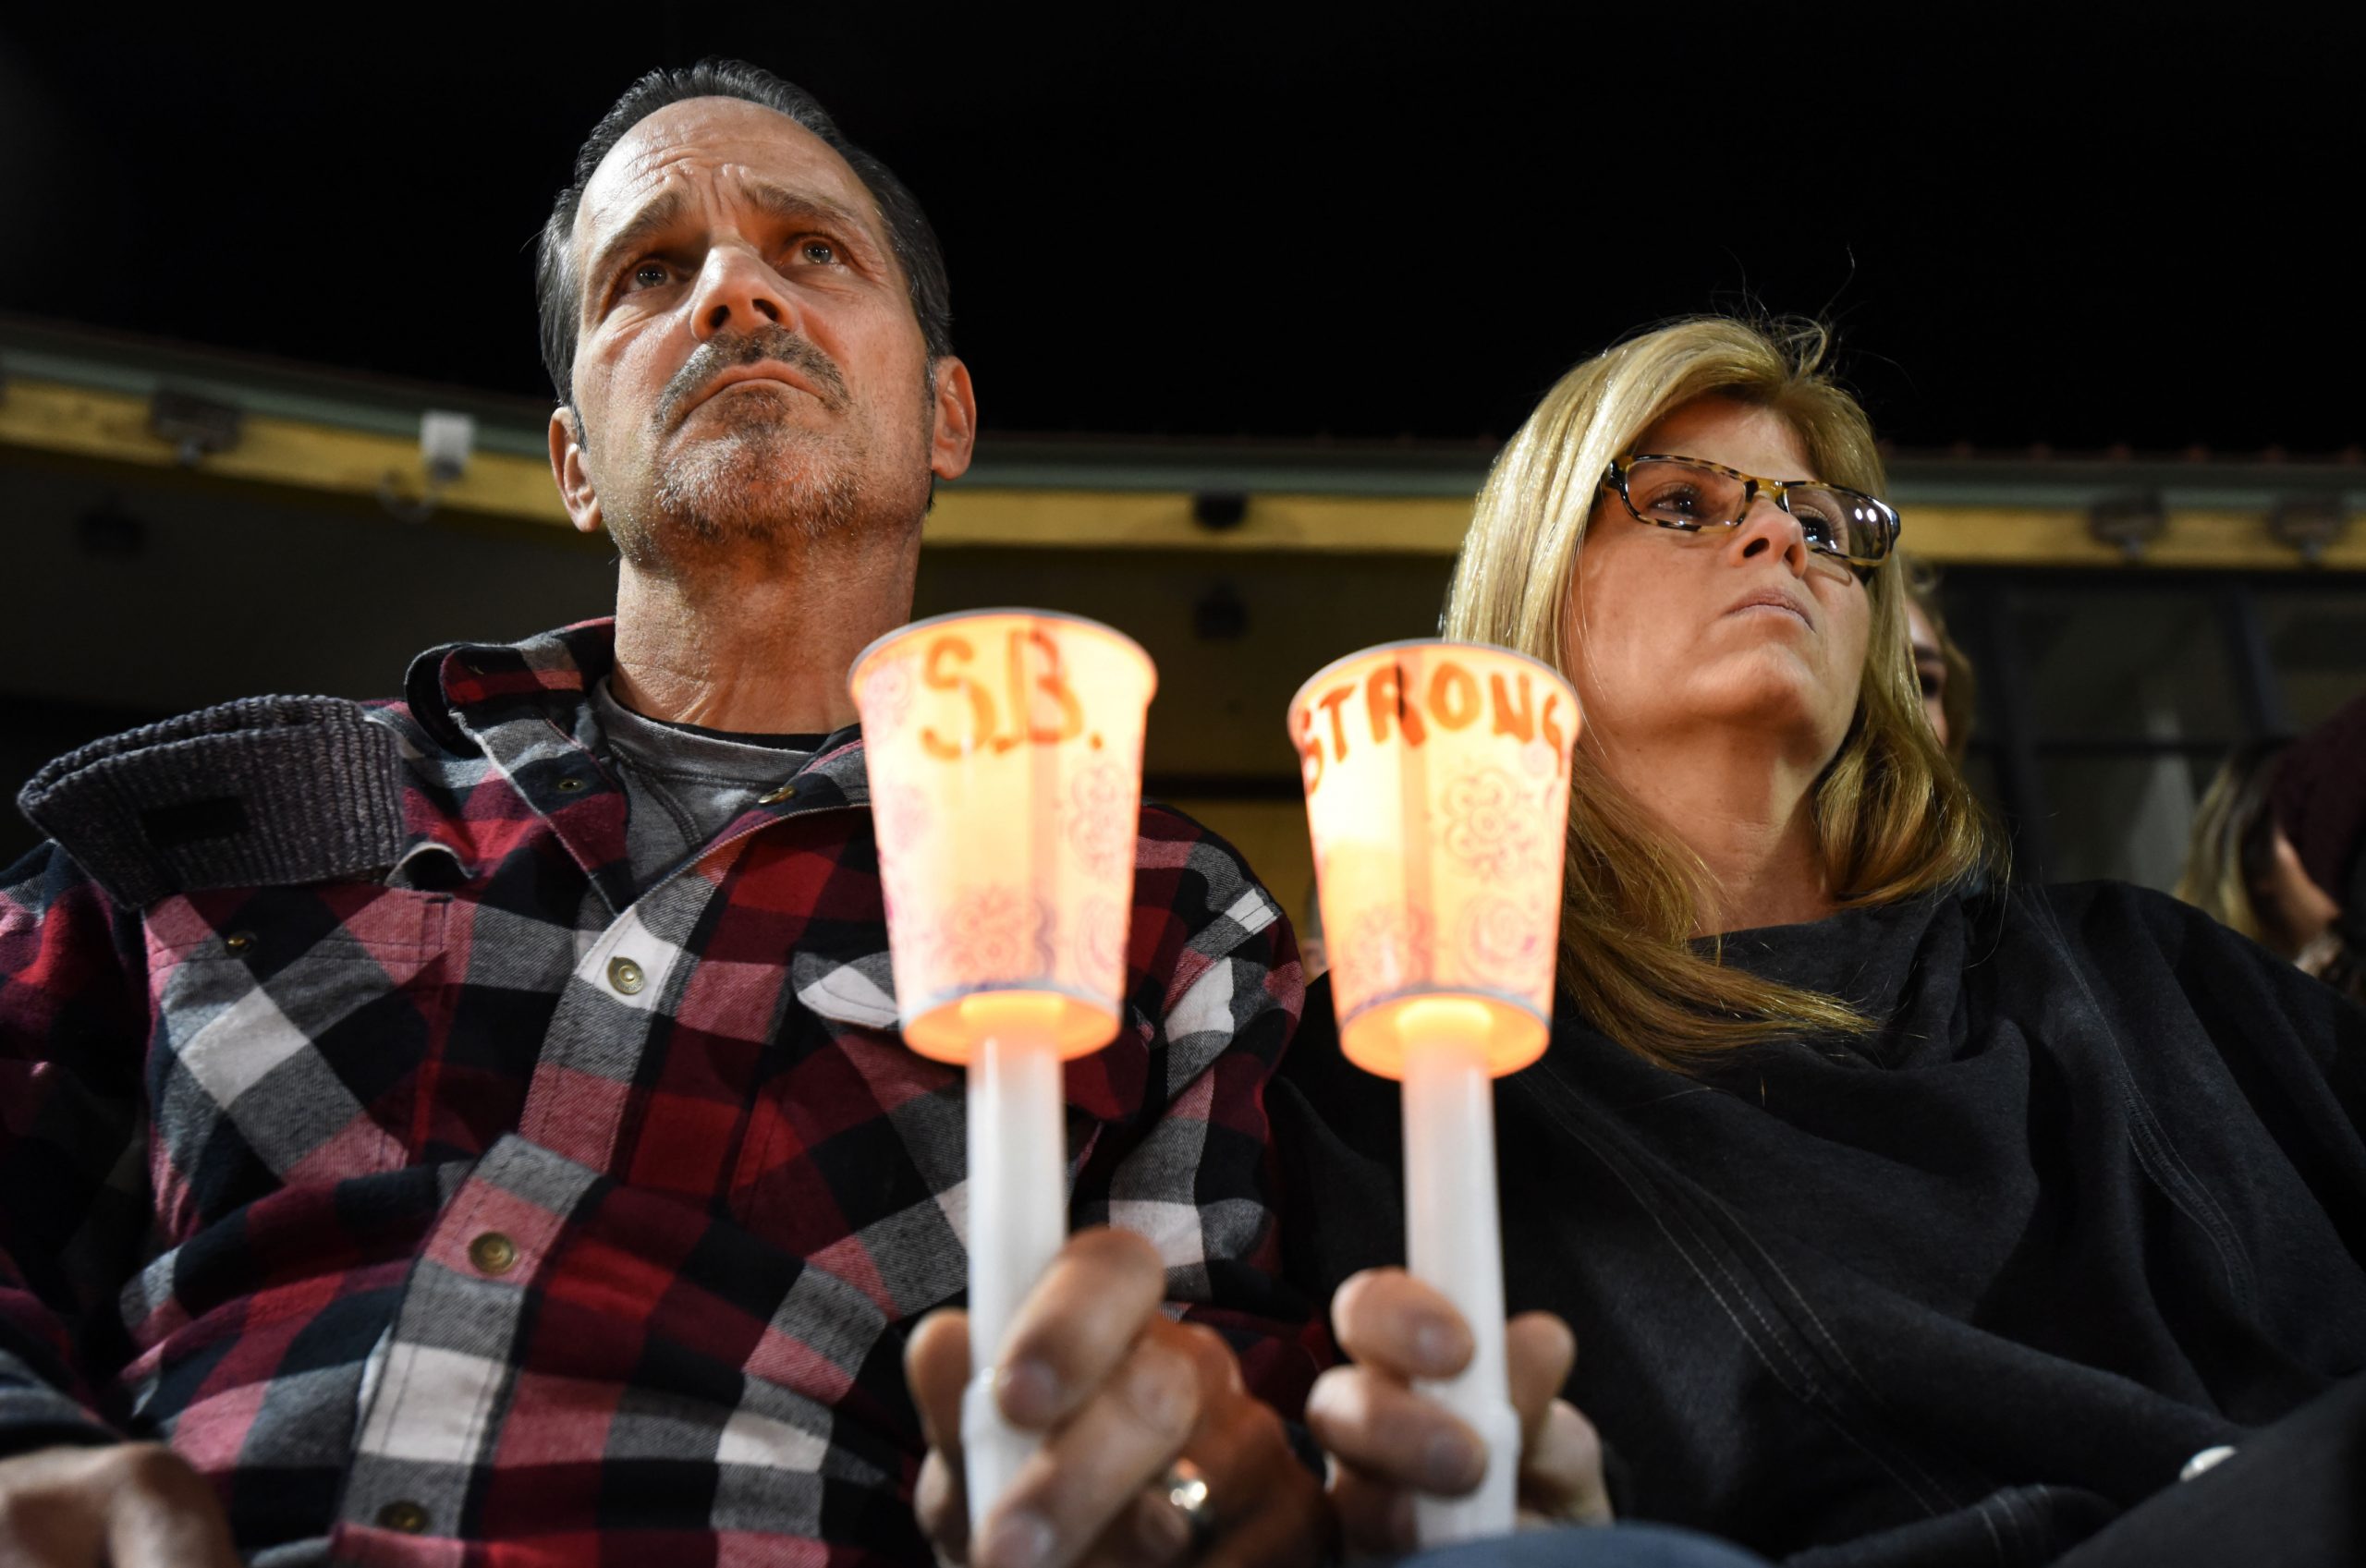 Gordon and Denise Baciorek of Temecula show their support during a candle light vigil for the victims of yesterdays mass shooting at the Inland Regional Center is head at San Bernardino's San Manuel Stadium in San Bernardino Thursday, Dec. 3, 2015. - The Press-Enterprise